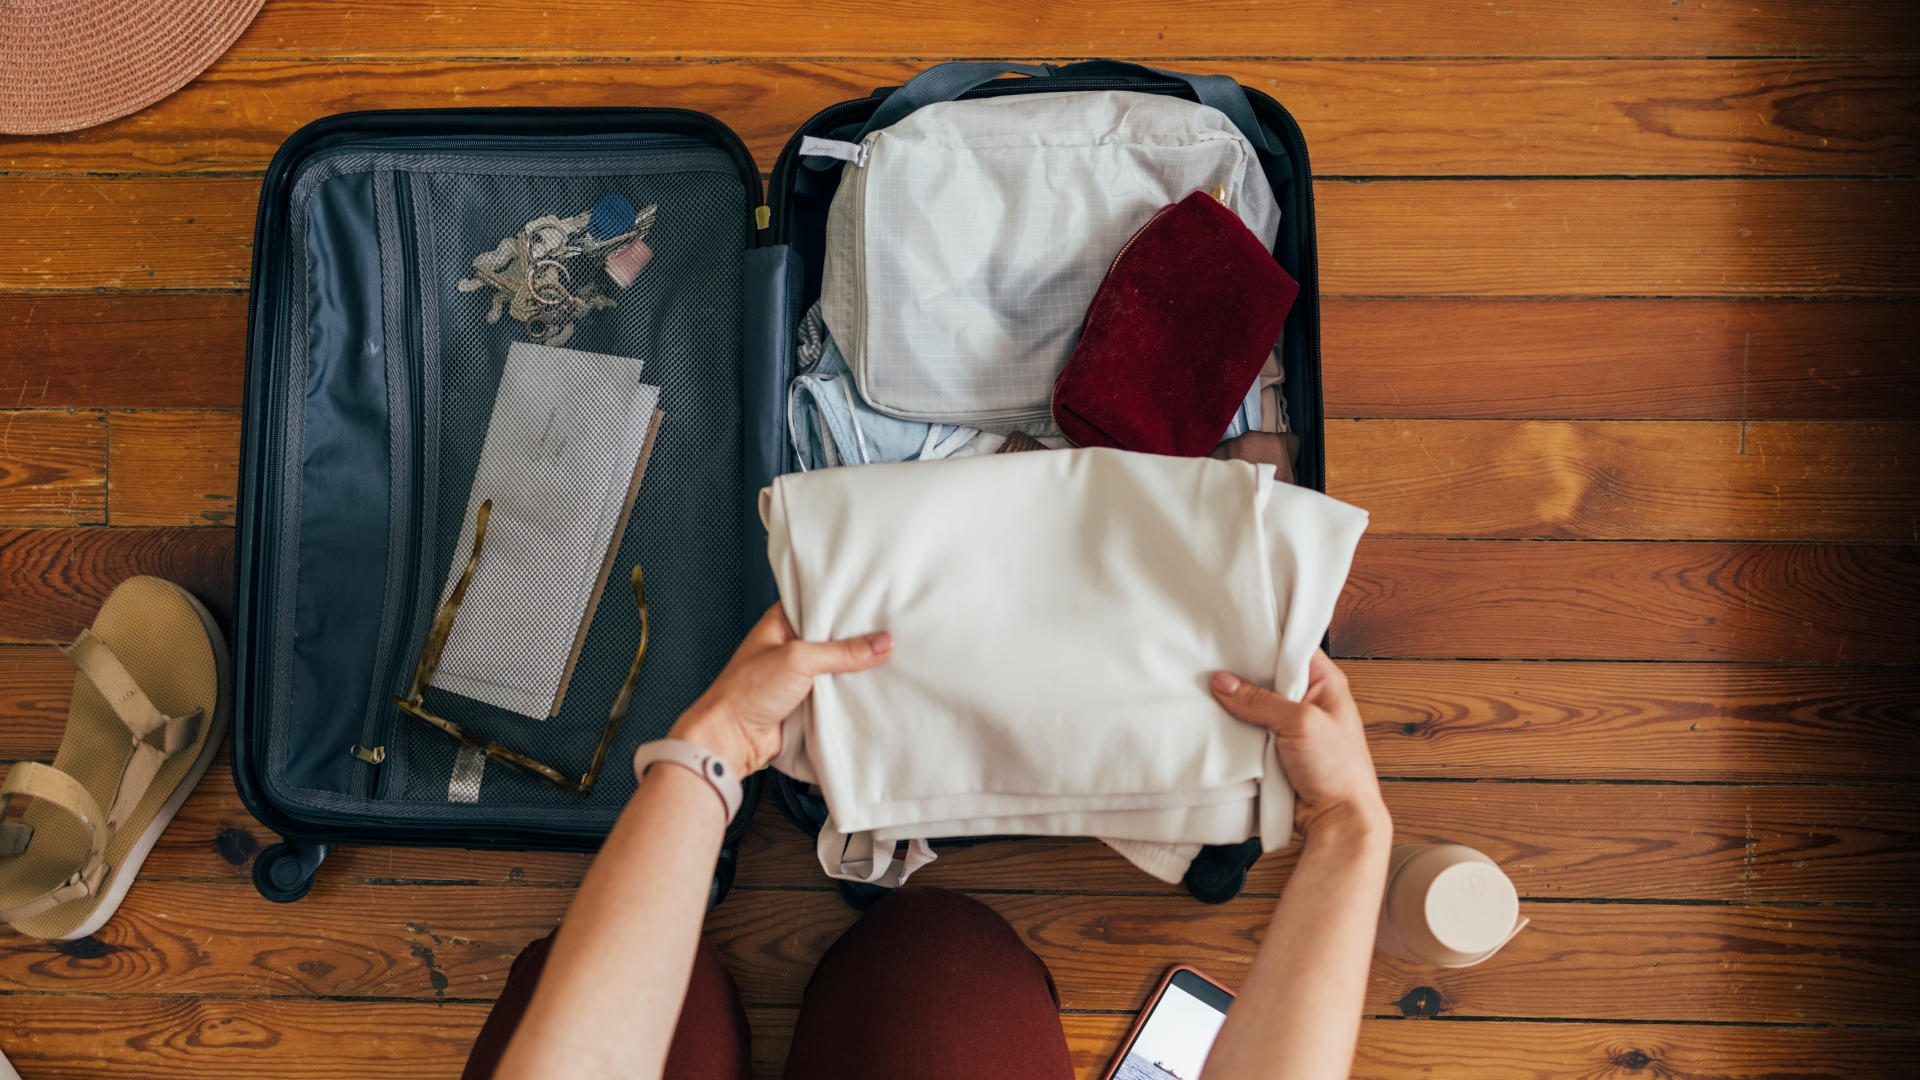 Travel expert reveals clever trick to save suitcase space when on holiday